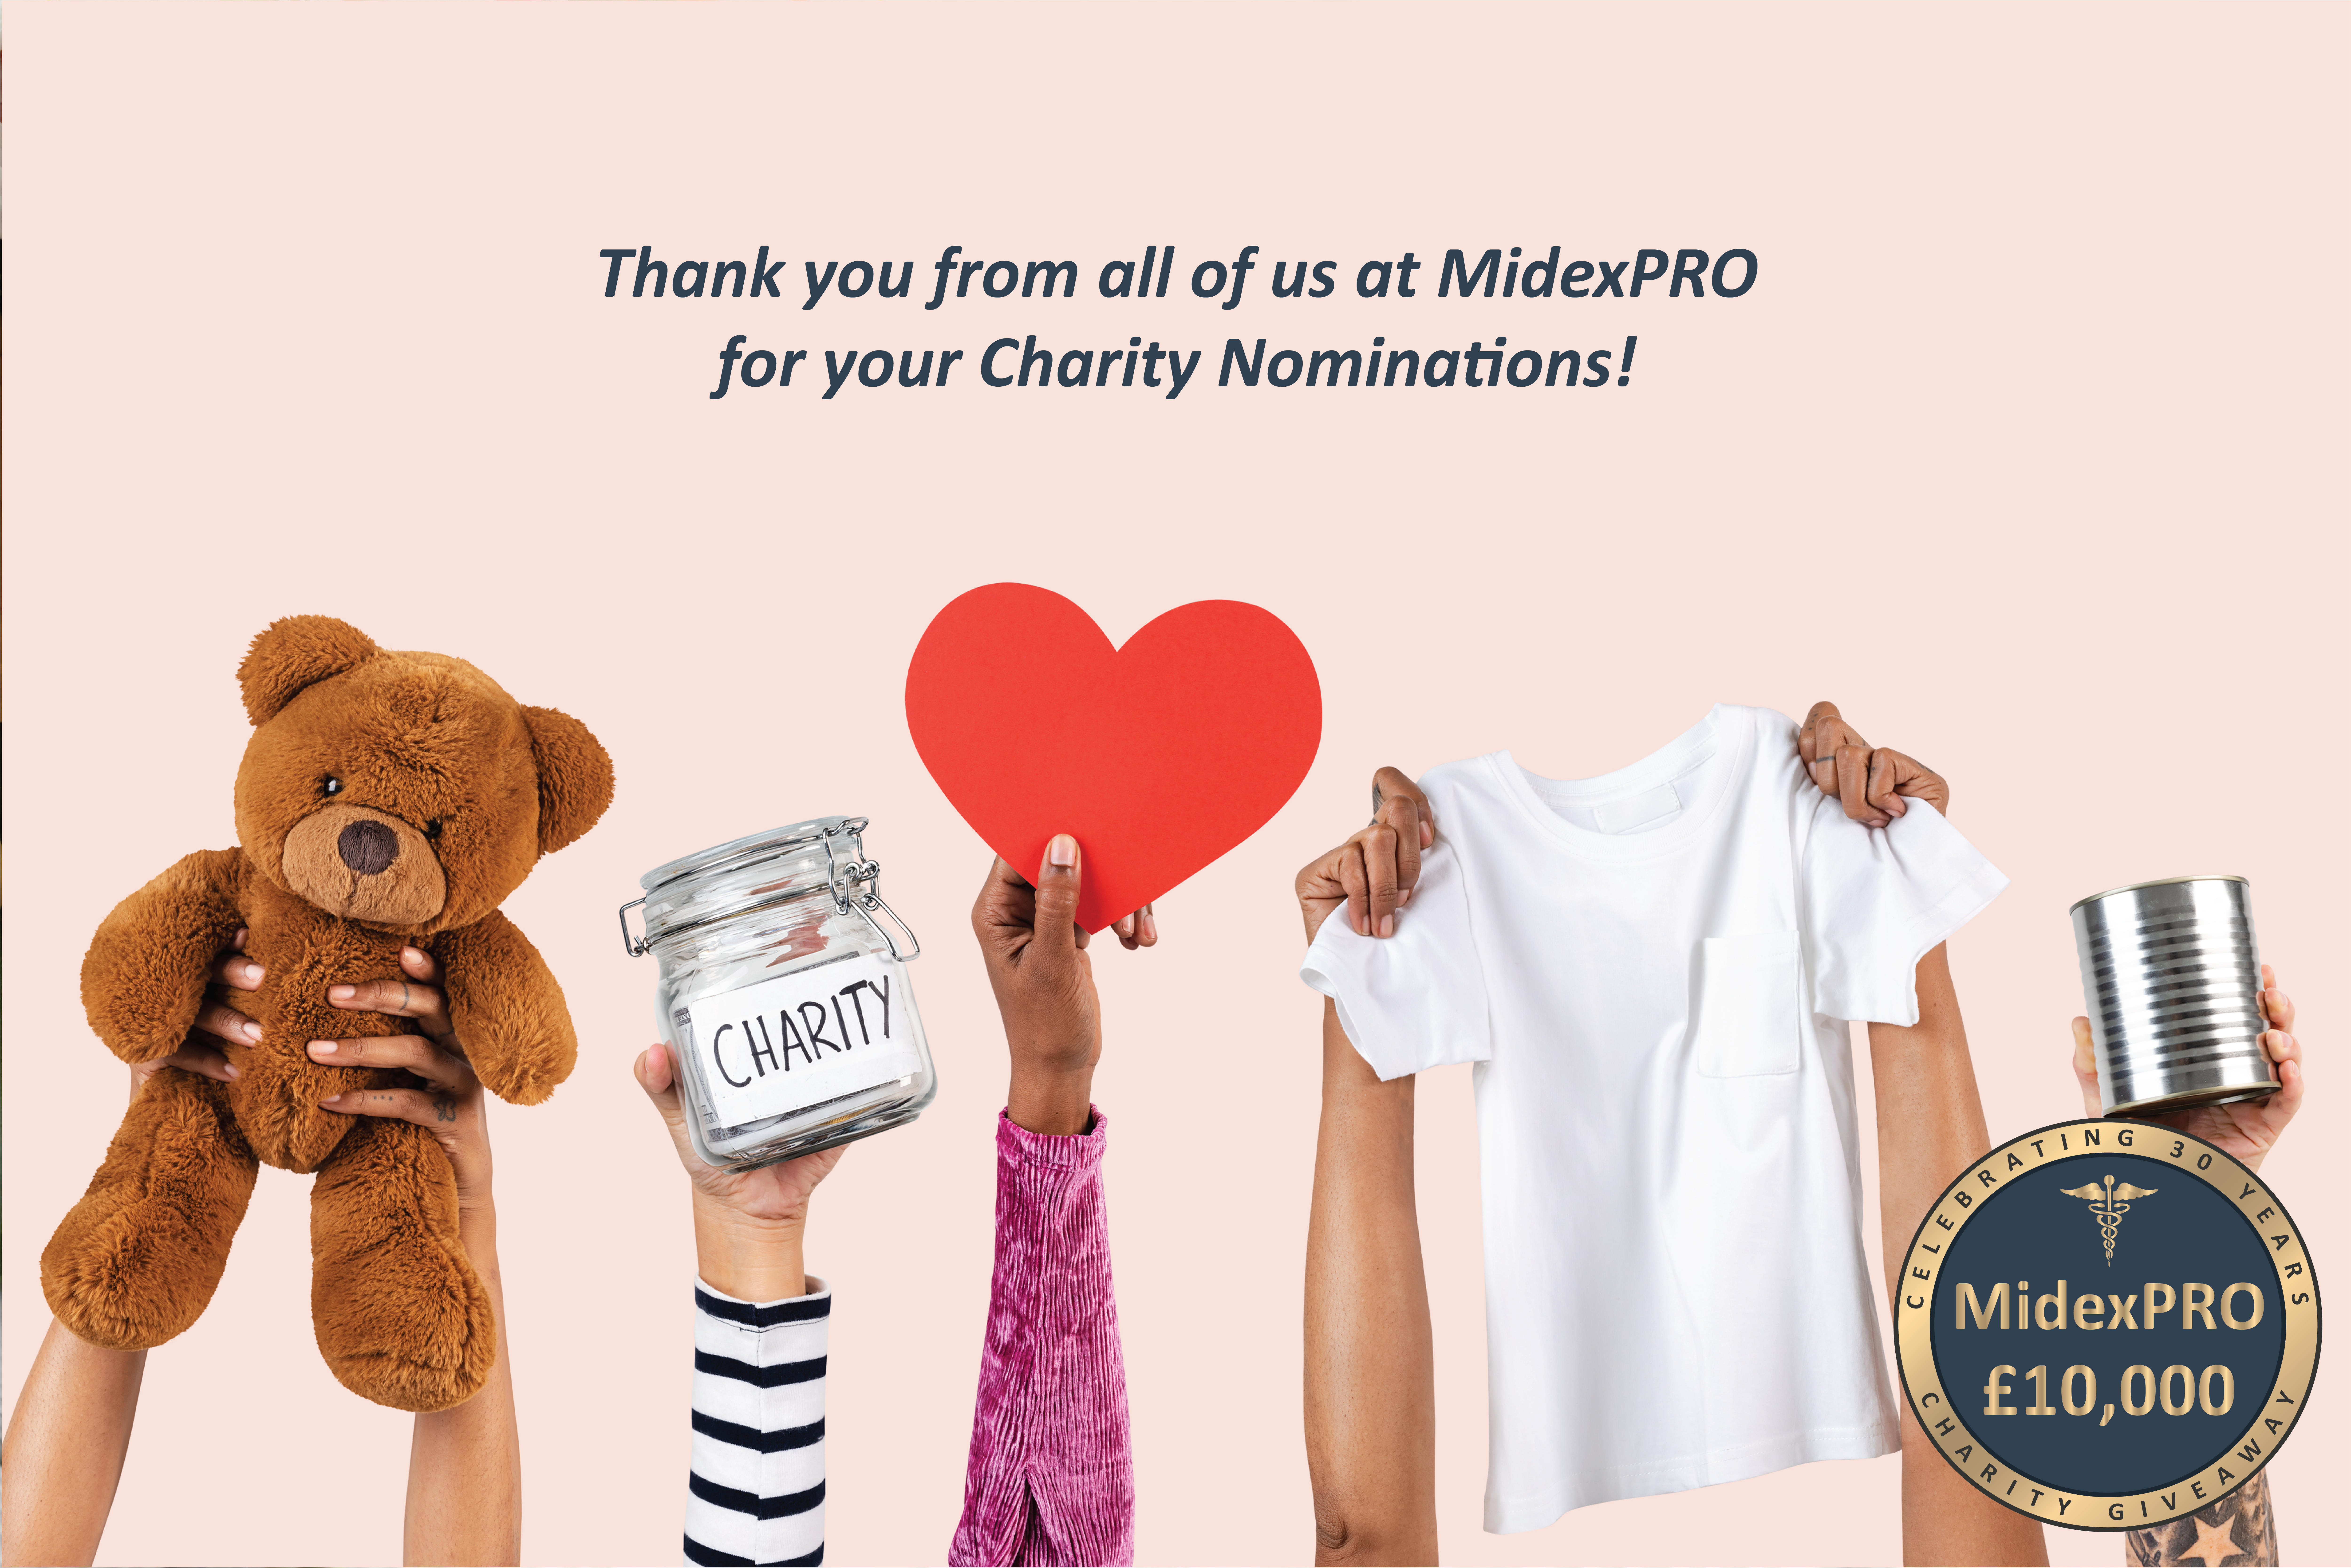 MidexPRO donates to charitable causes